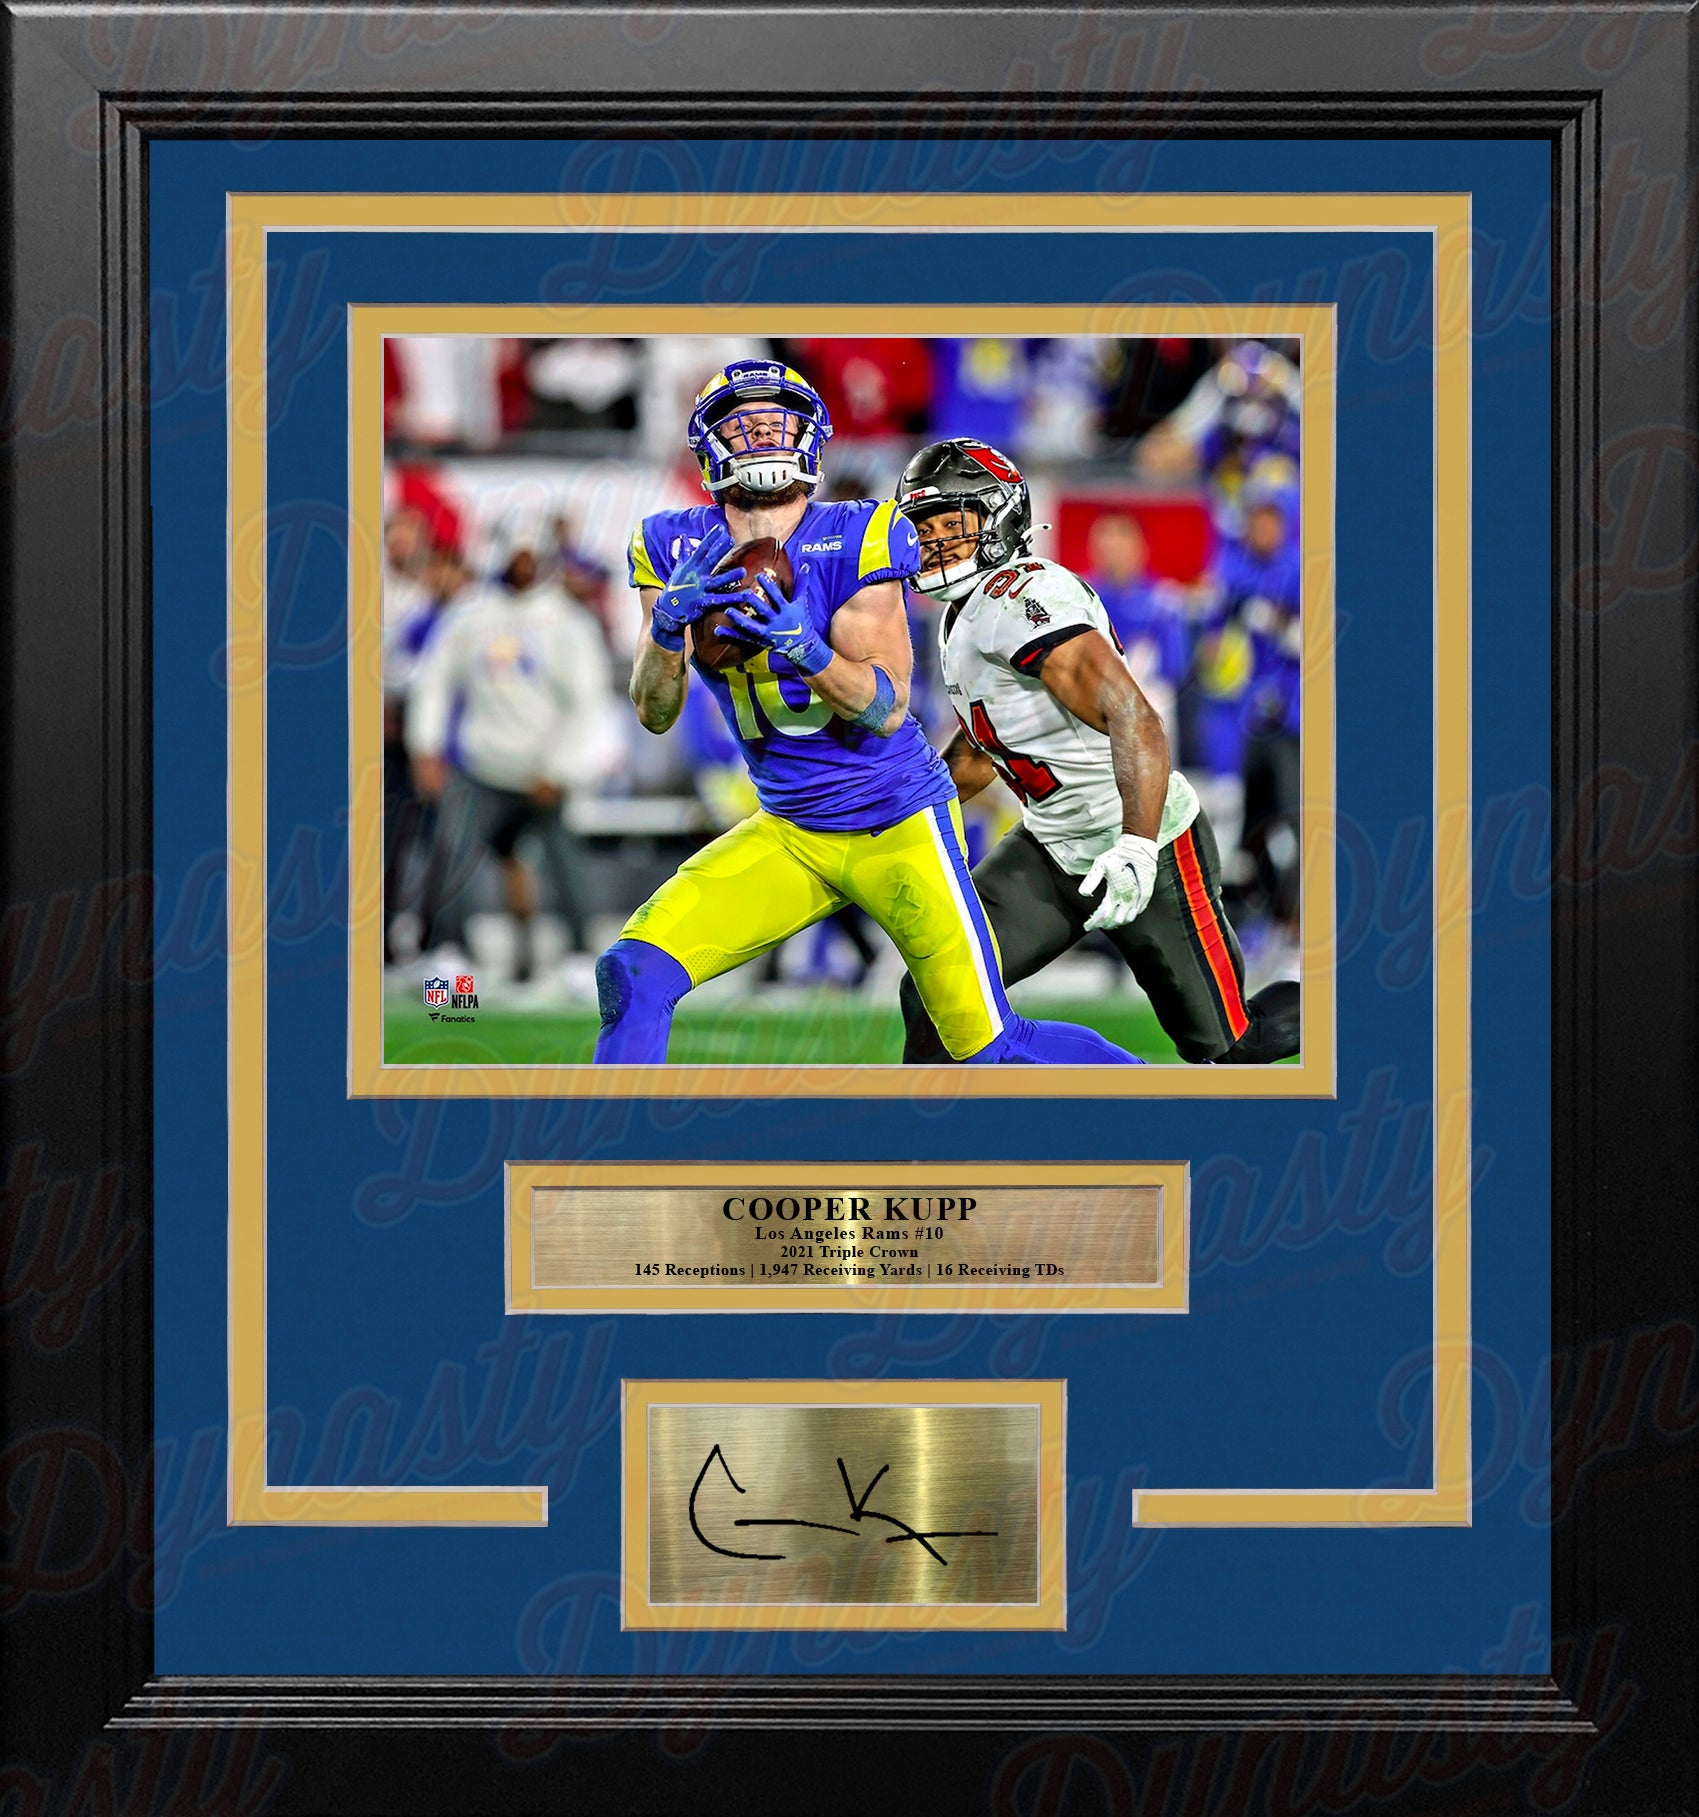 Cooper Kupp Playoff Action Los Angeles Rams 8' x 10' Framed Football Photo  with Engraved Autograph